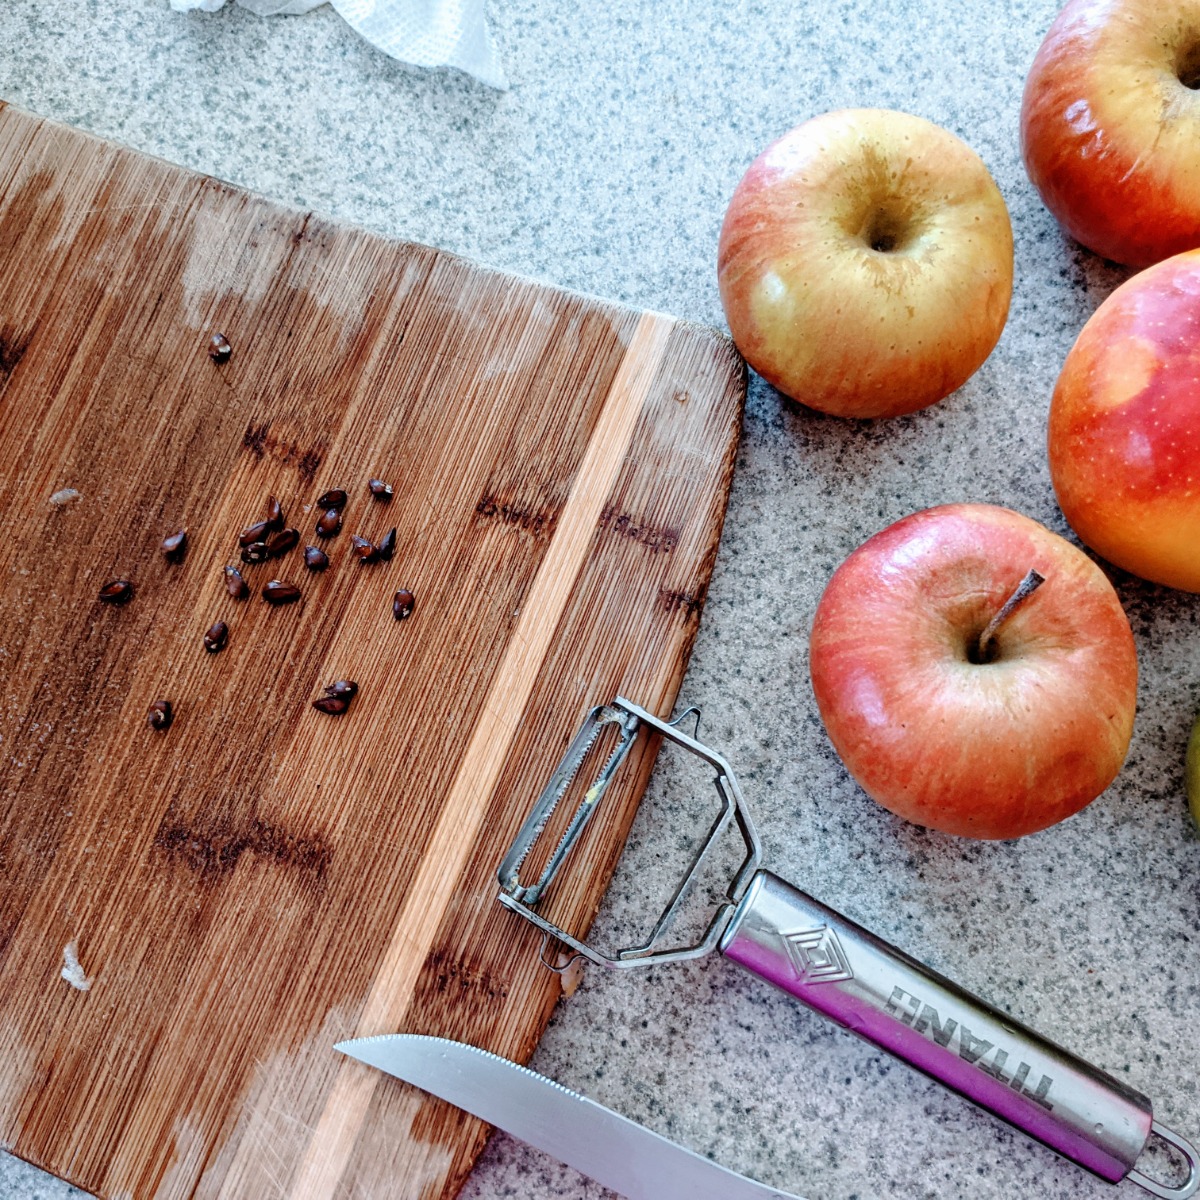 Apple Seeds Removed from Apples with a Cutting Board, Knife, and Peeler